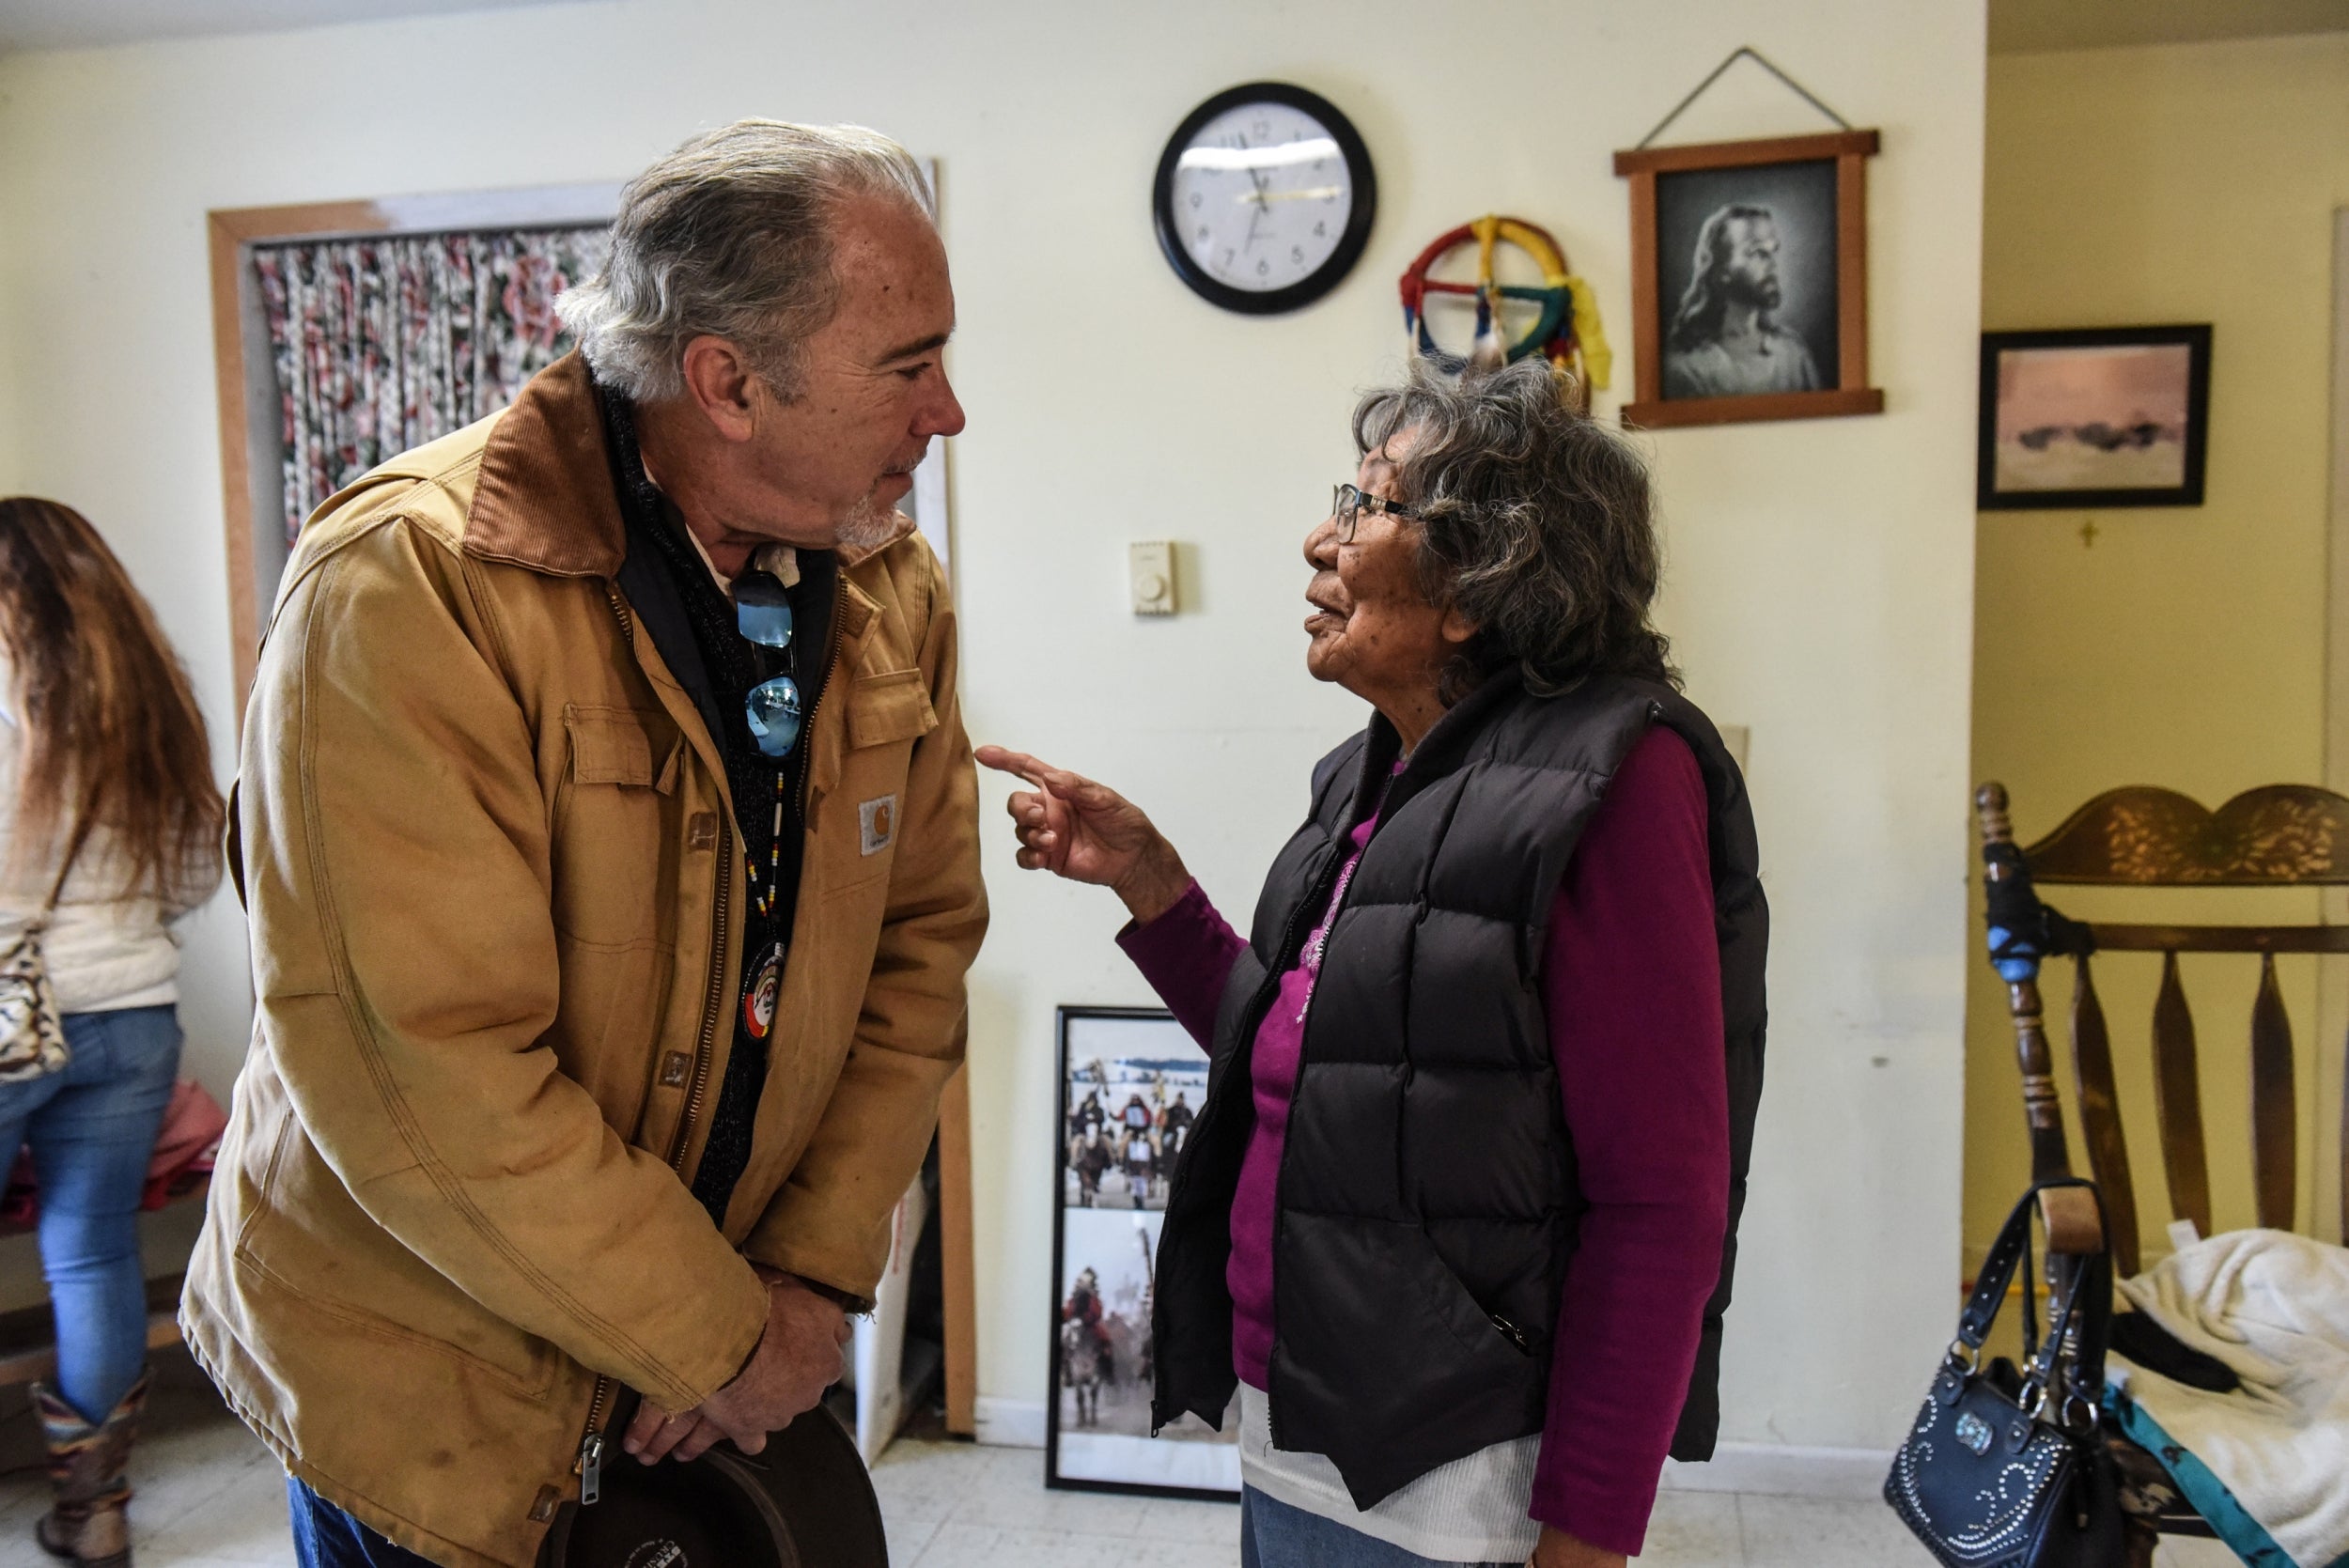 Brad Upton, a descendant of the commander of the US troops who carried out the Wounded Knee massacre in South Dakota in 1890, meets Debbie Day, a relative of one of the Lakota victims, on a reservation in Bridger in November 2019 to formally apologise for his ancestor's part in the massacre